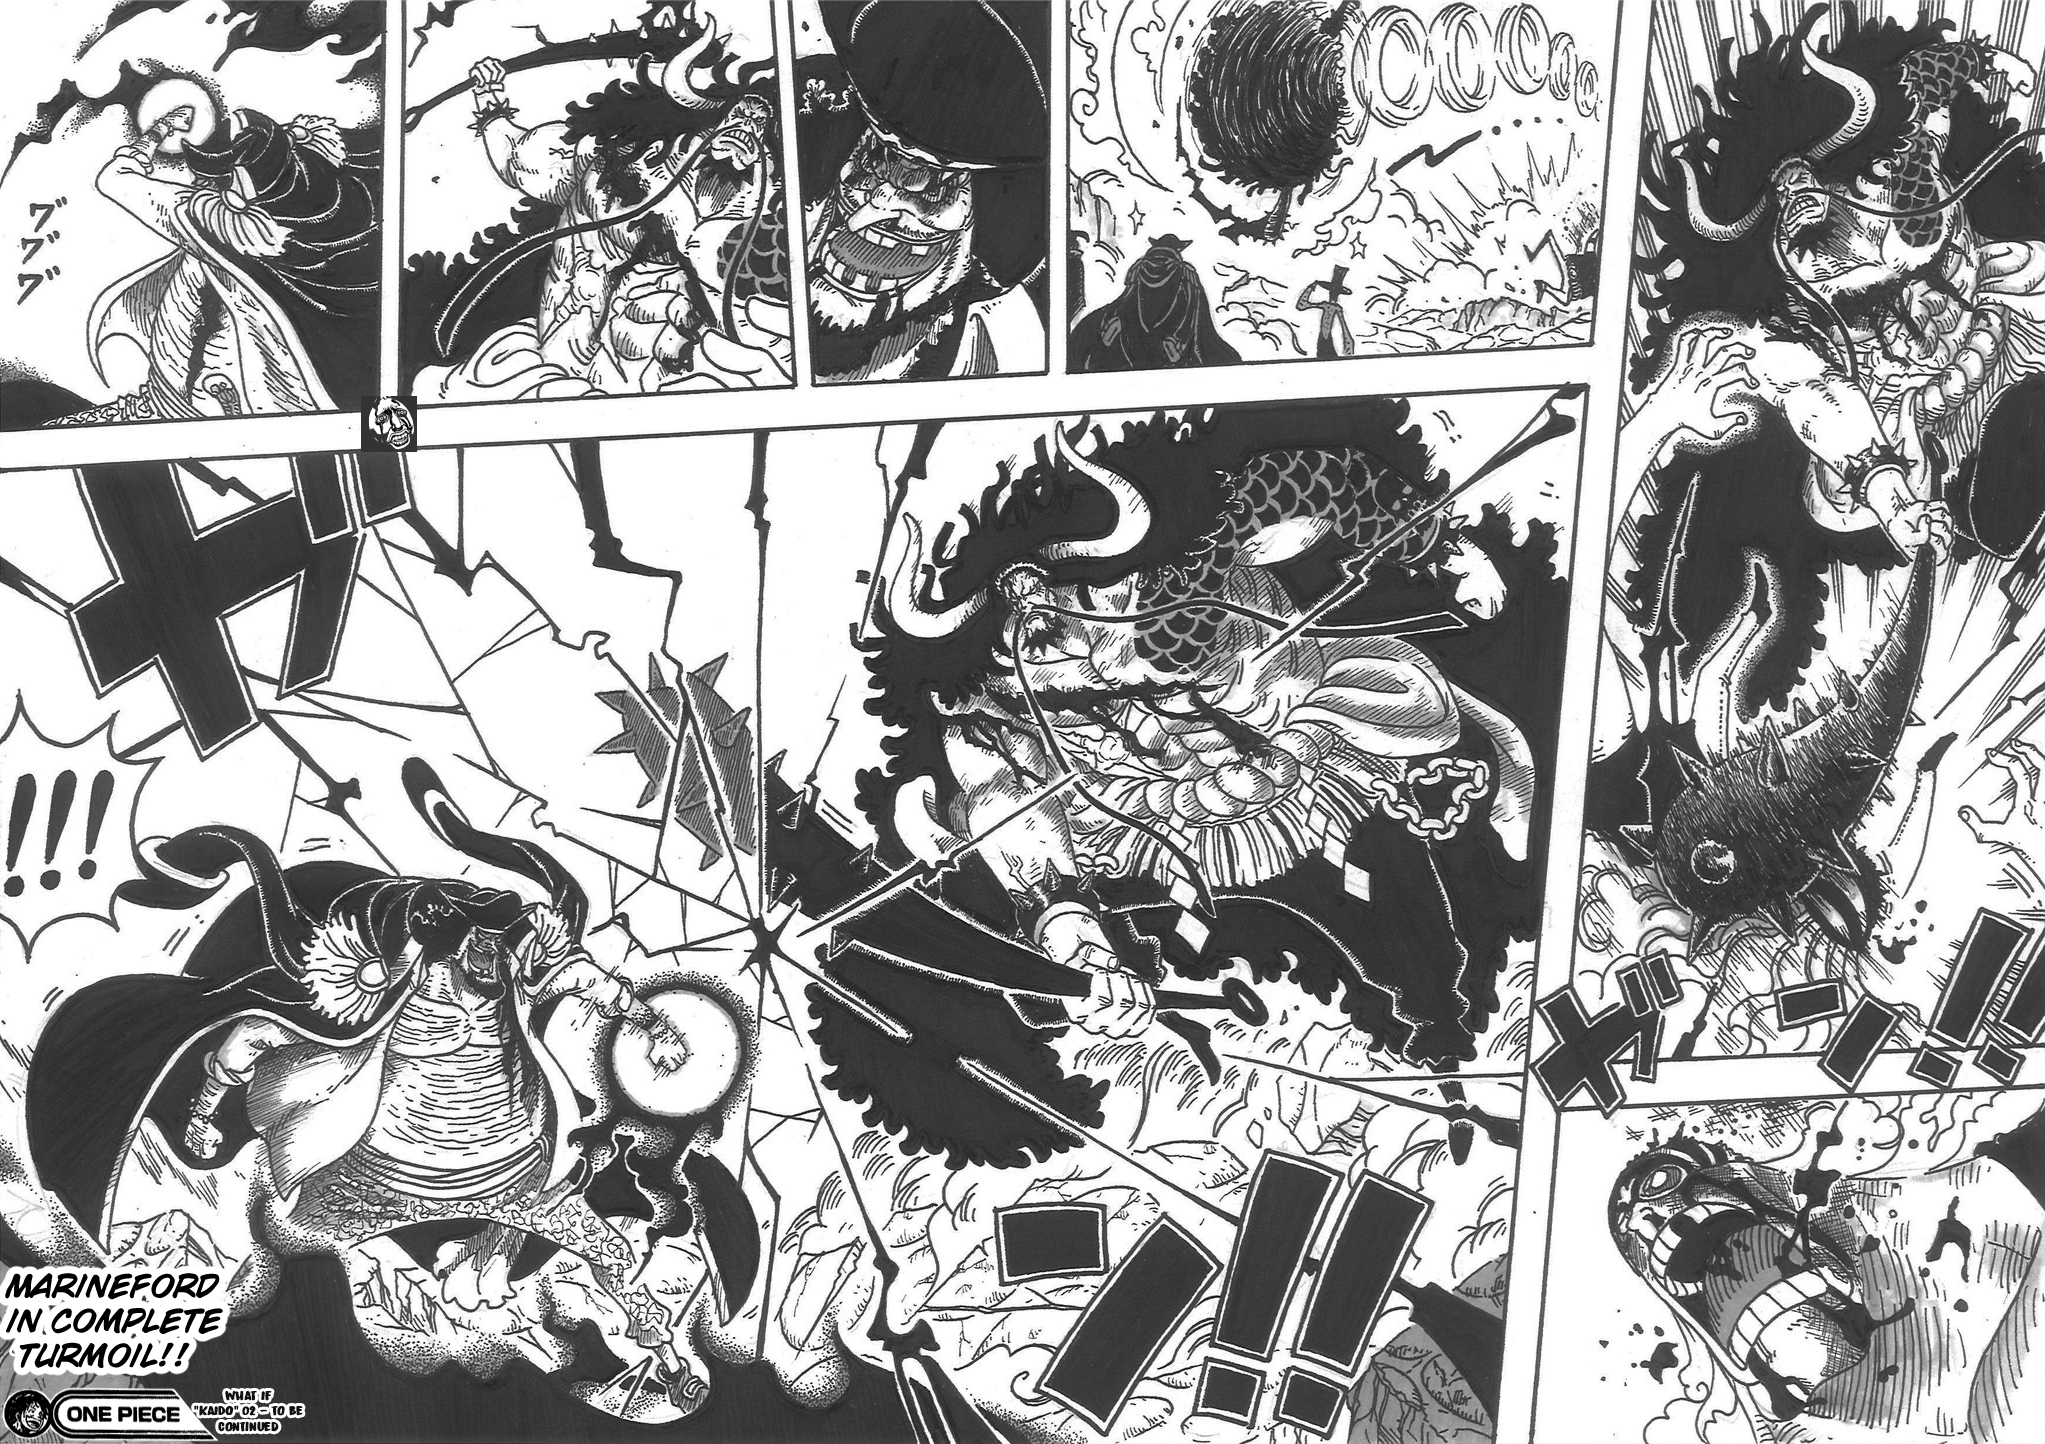 One Piece What If Kaido Arrived At Marineford A Fan Manga By Ricky Acong Subroto Chapter 1 The Library Of Ohara